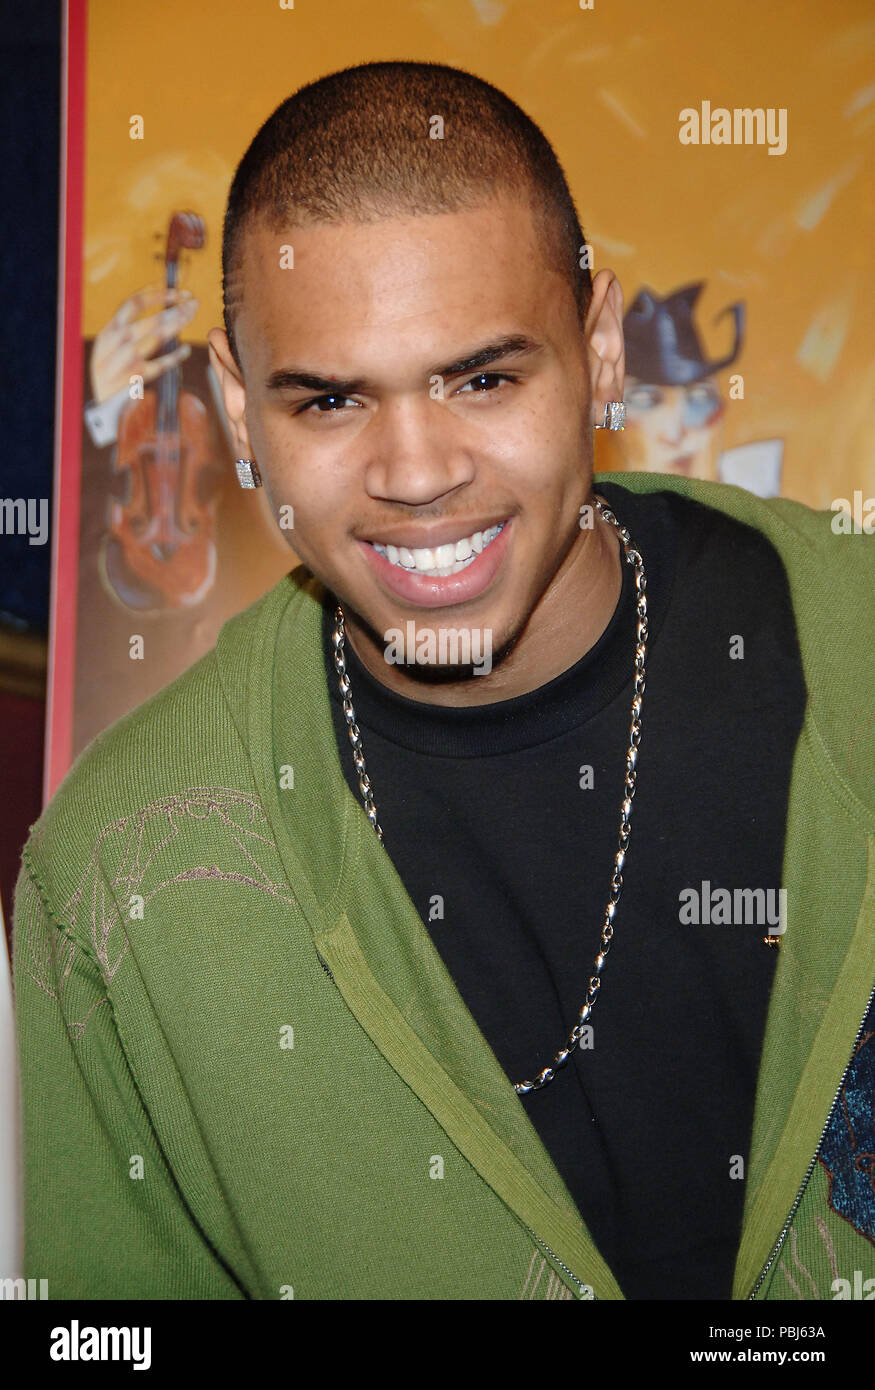 Chris Brown at the 49th GRAMMYs Nominations at the Music Box @ The Fonda Theatre In Los Angeles.  headshot eye contact smileBrownChris031 Red Carpet Event, Vertical, USA, Film Industry, Celebrities,  Photography, Bestof, Arts Culture and Entertainment, Topix Celebrities fashion /  Vertical, Best of, Event in Hollywood Life - California,  Red Carpet and backstage, USA, Film Industry, Celebrities,  movie celebrities, TV celebrities, Music celebrities, Photography, Bestof, Arts Culture and Entertainment,  Topix, headshot, vertical, one person,, from the year , 2006, inquiry tsuni@Gamma-USA.com Stock Photo